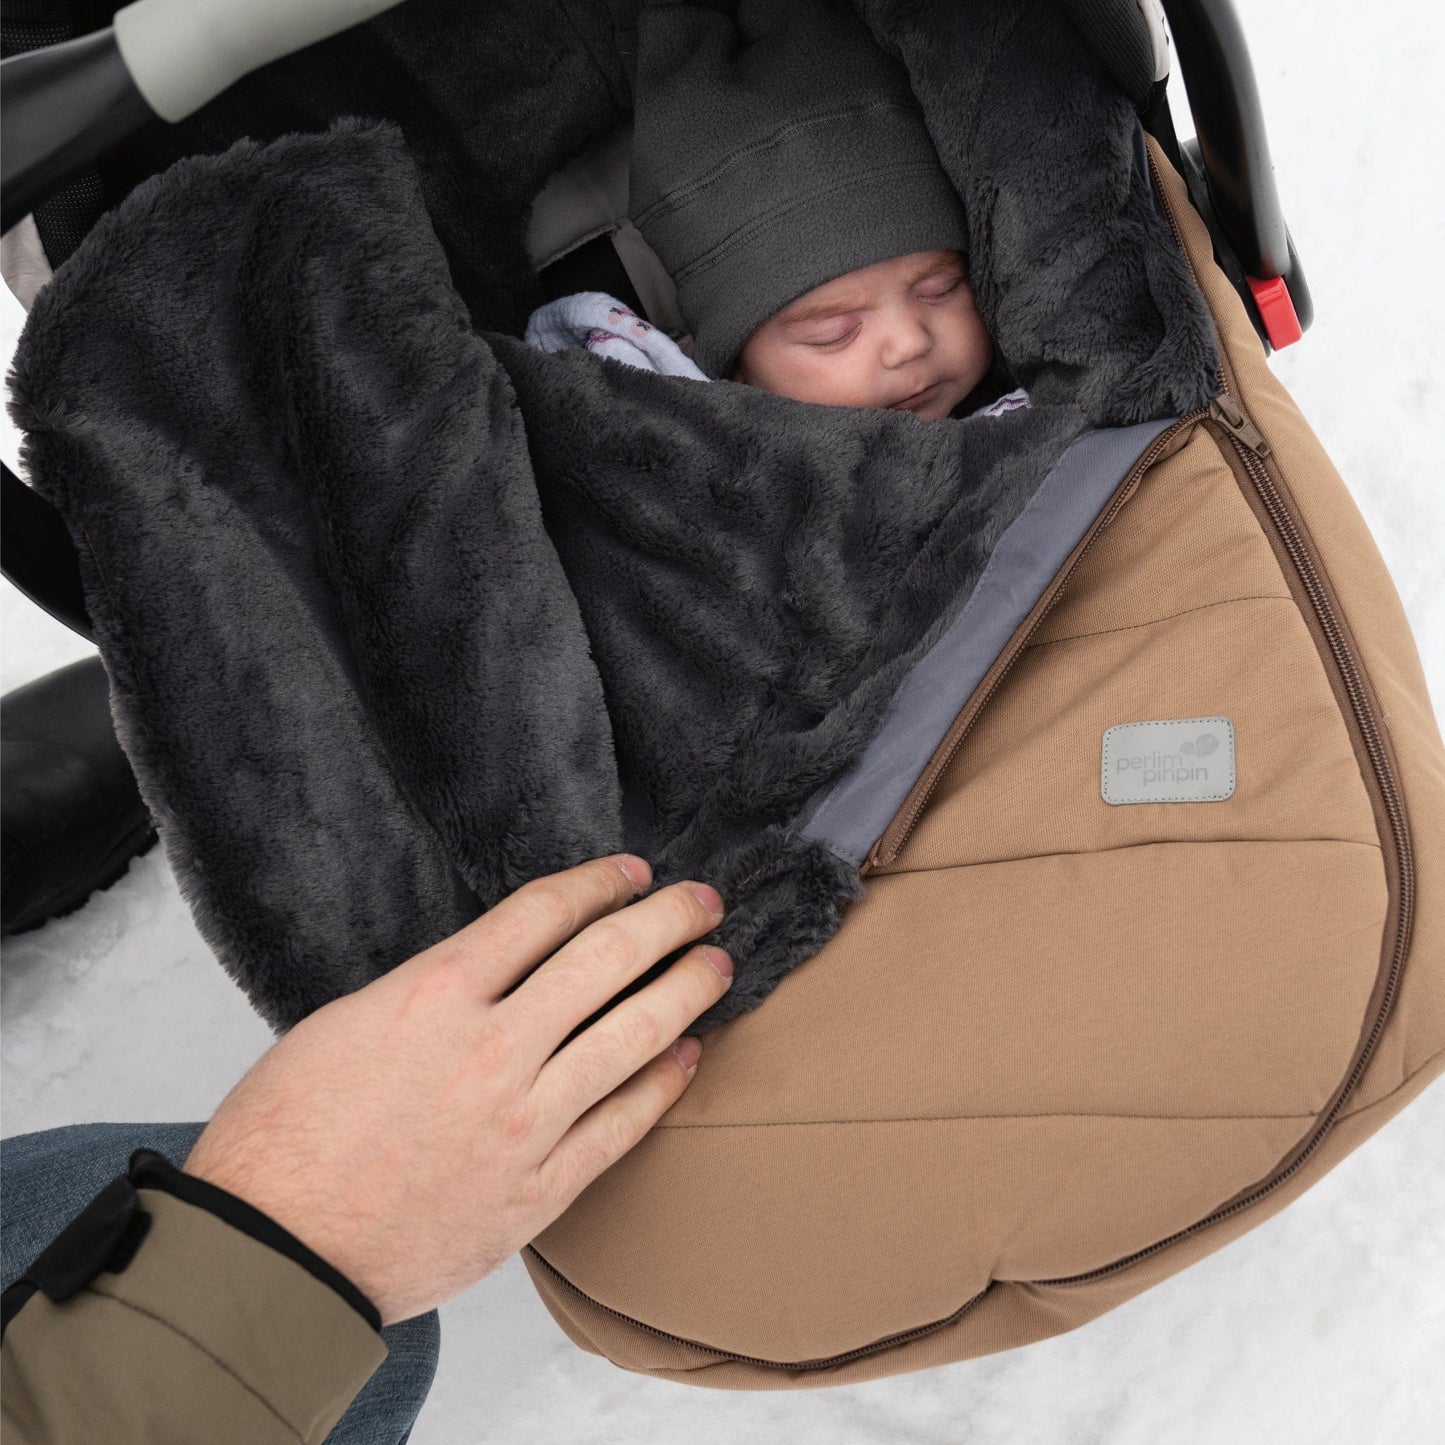 Baby car seat cover for winter - Toffee textured